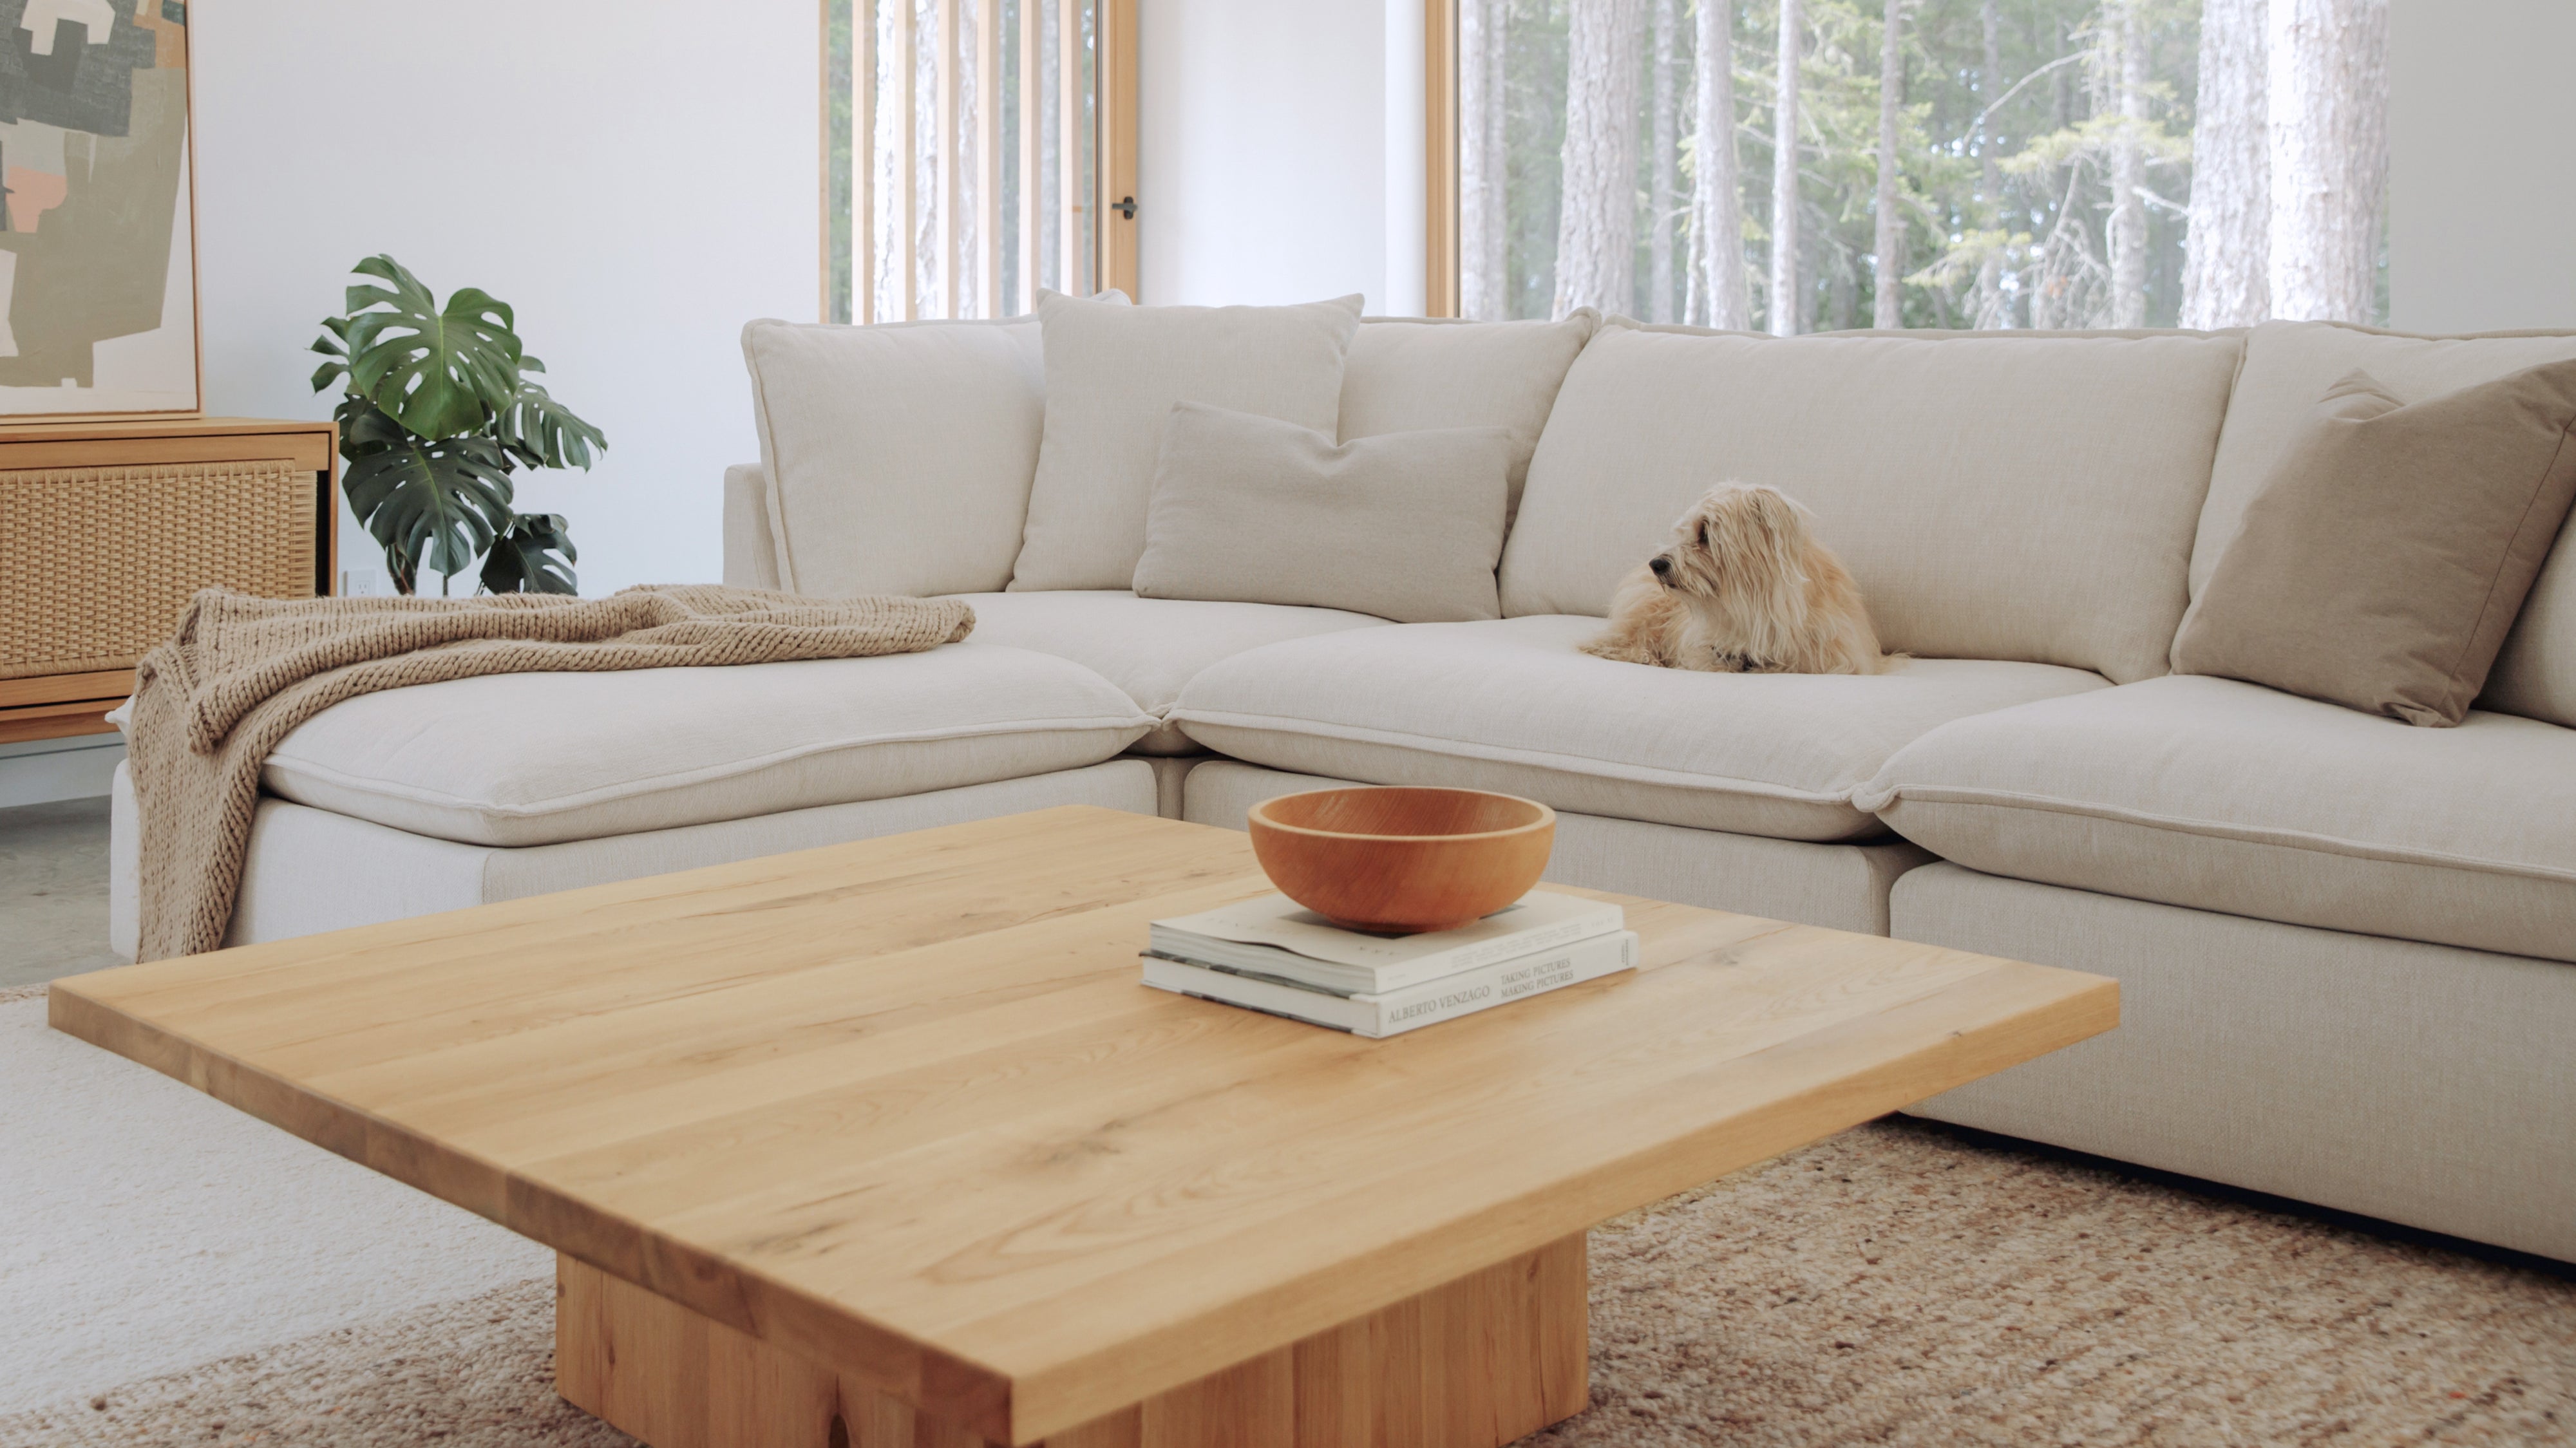 Chill Time 4-Piece Modular Sectional, Birch - Image 3